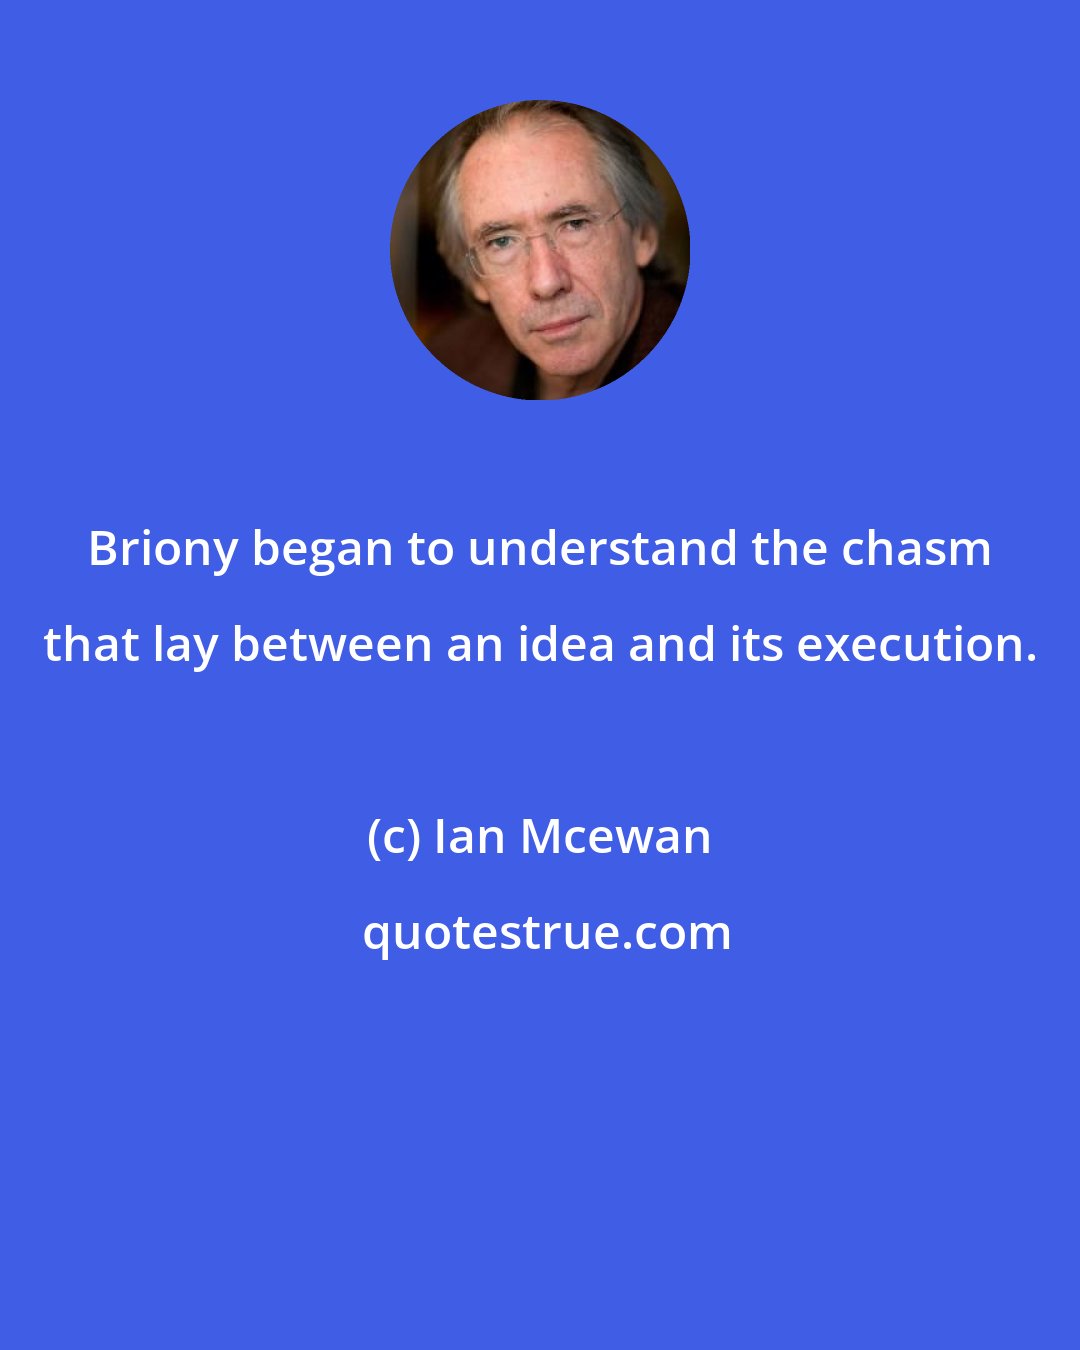 Ian Mcewan: Briony began to understand the chasm that lay between an idea and its execution.